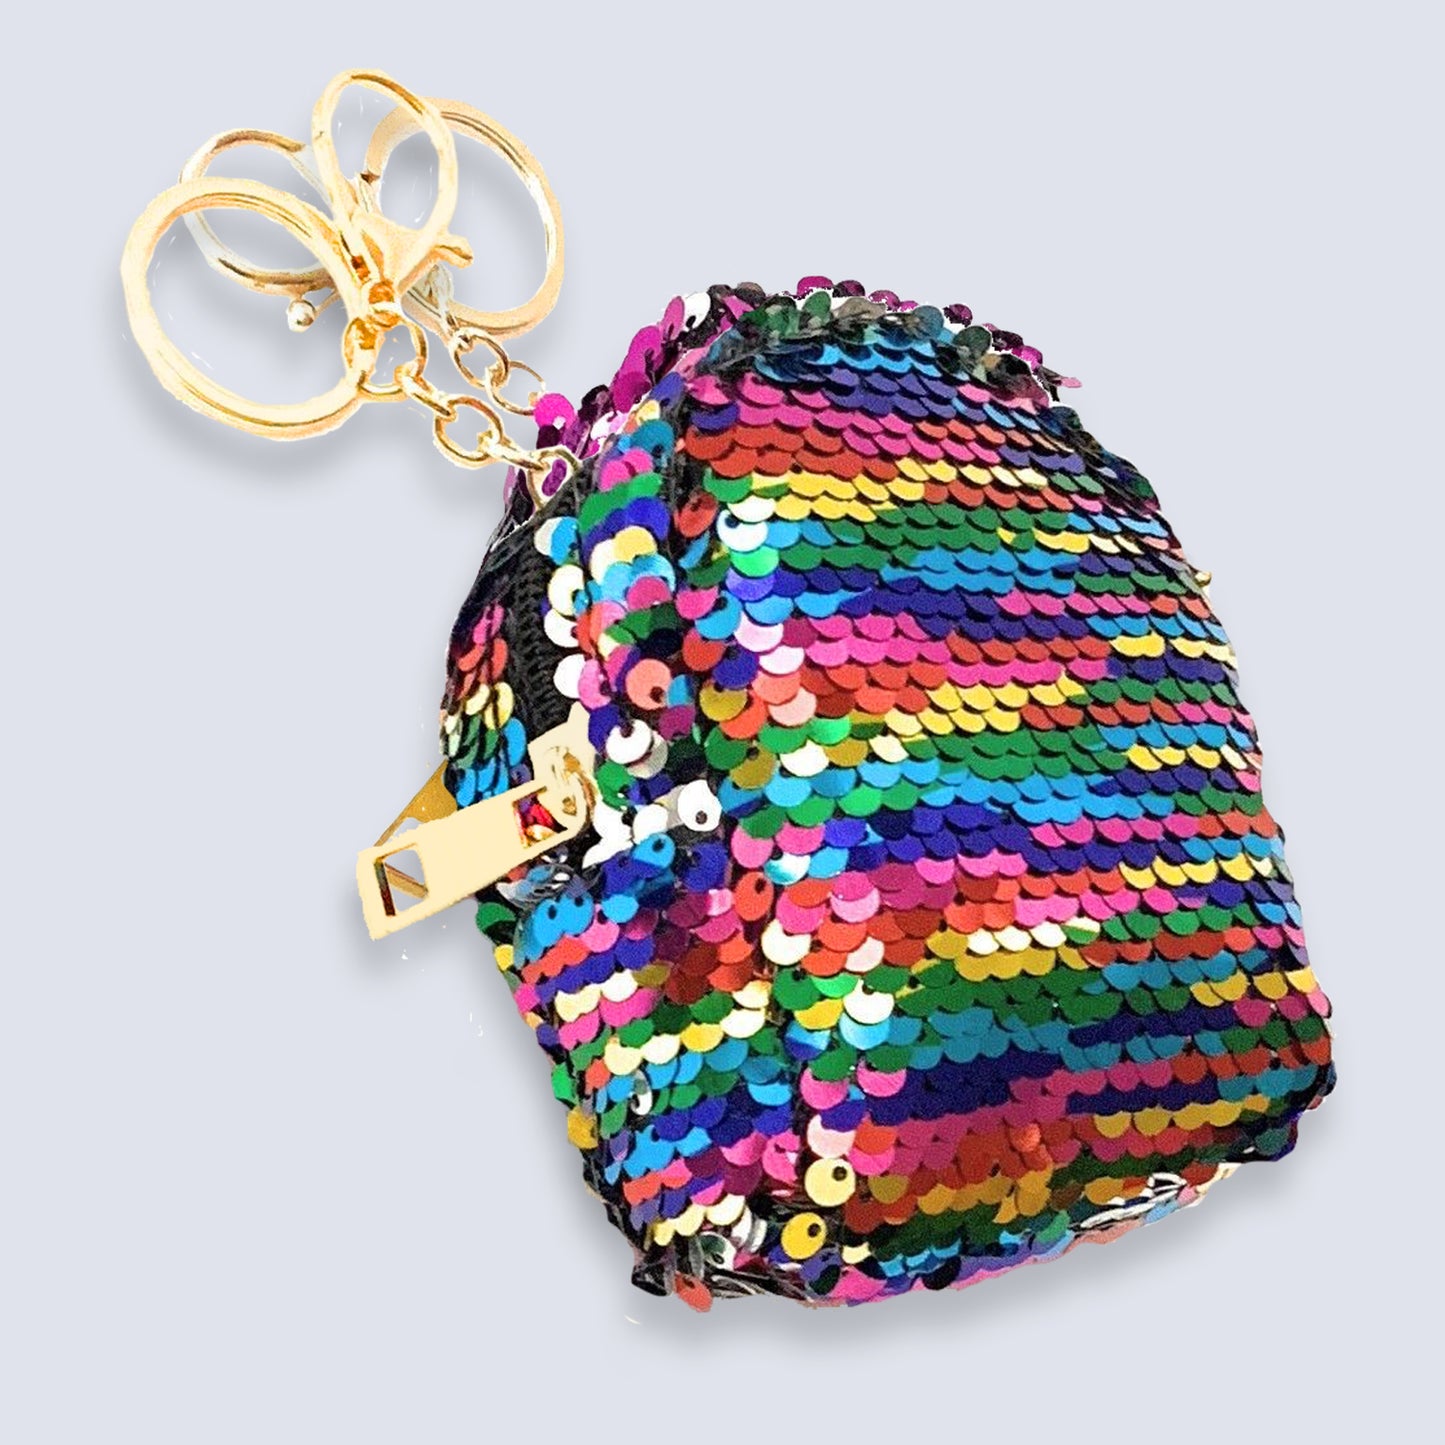 Sequin Colourful Rainbow Coin Purse Pouch Mini Backpack Bag Charm Keychain Wallet Girls UK